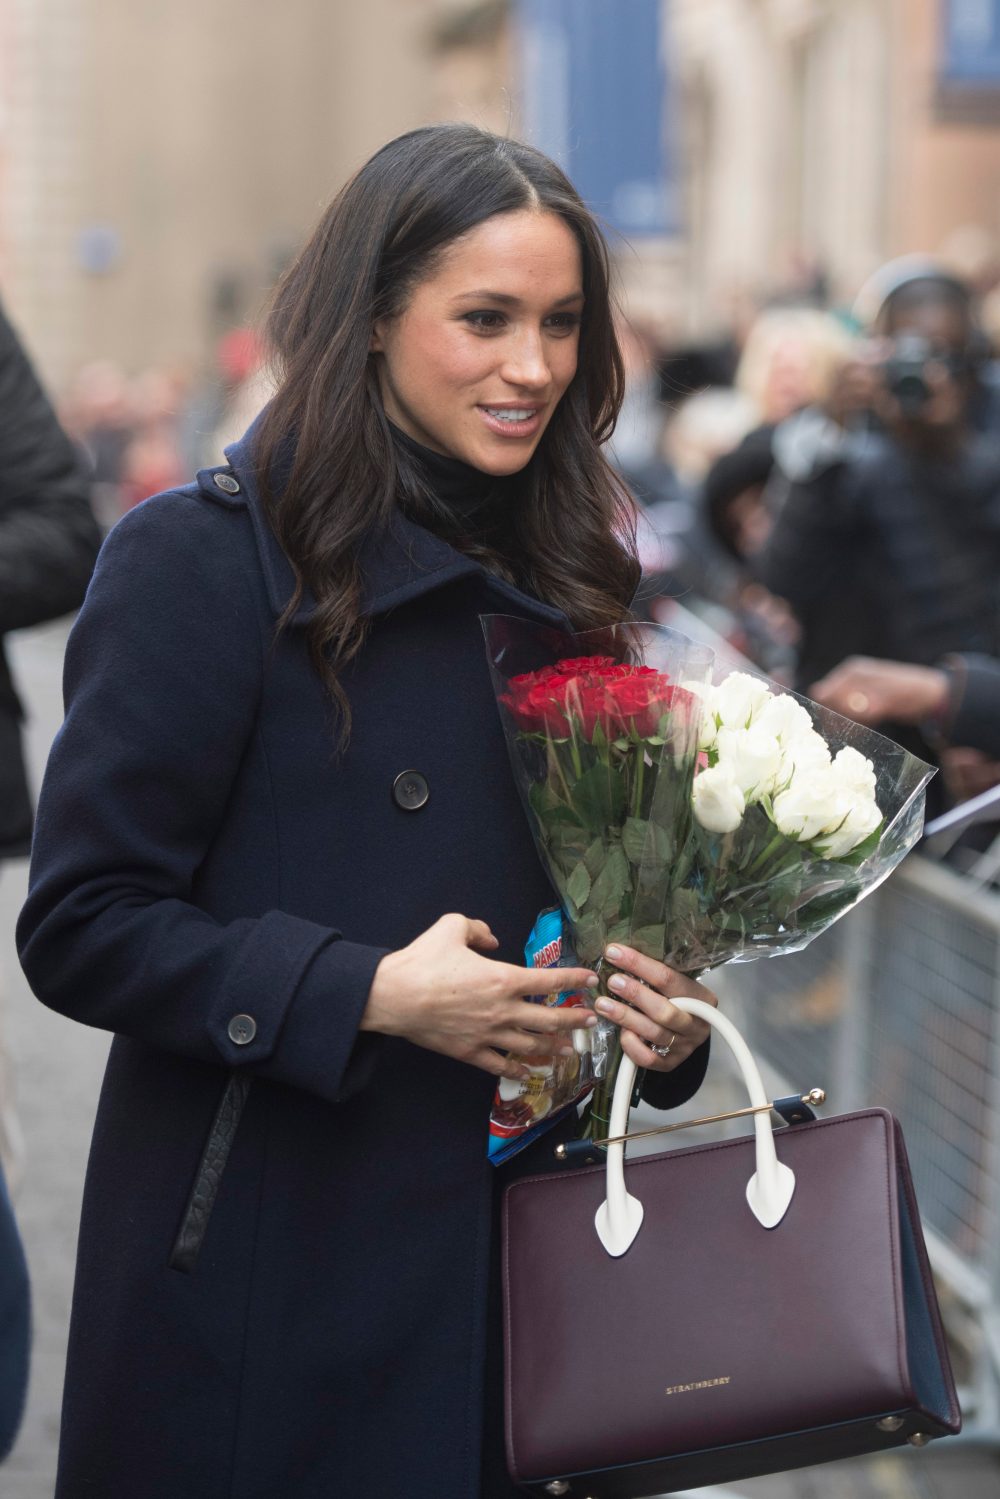 Meghan Markle's Favorite Purse Brand, Strathberry, Is on Sale at Saks ...